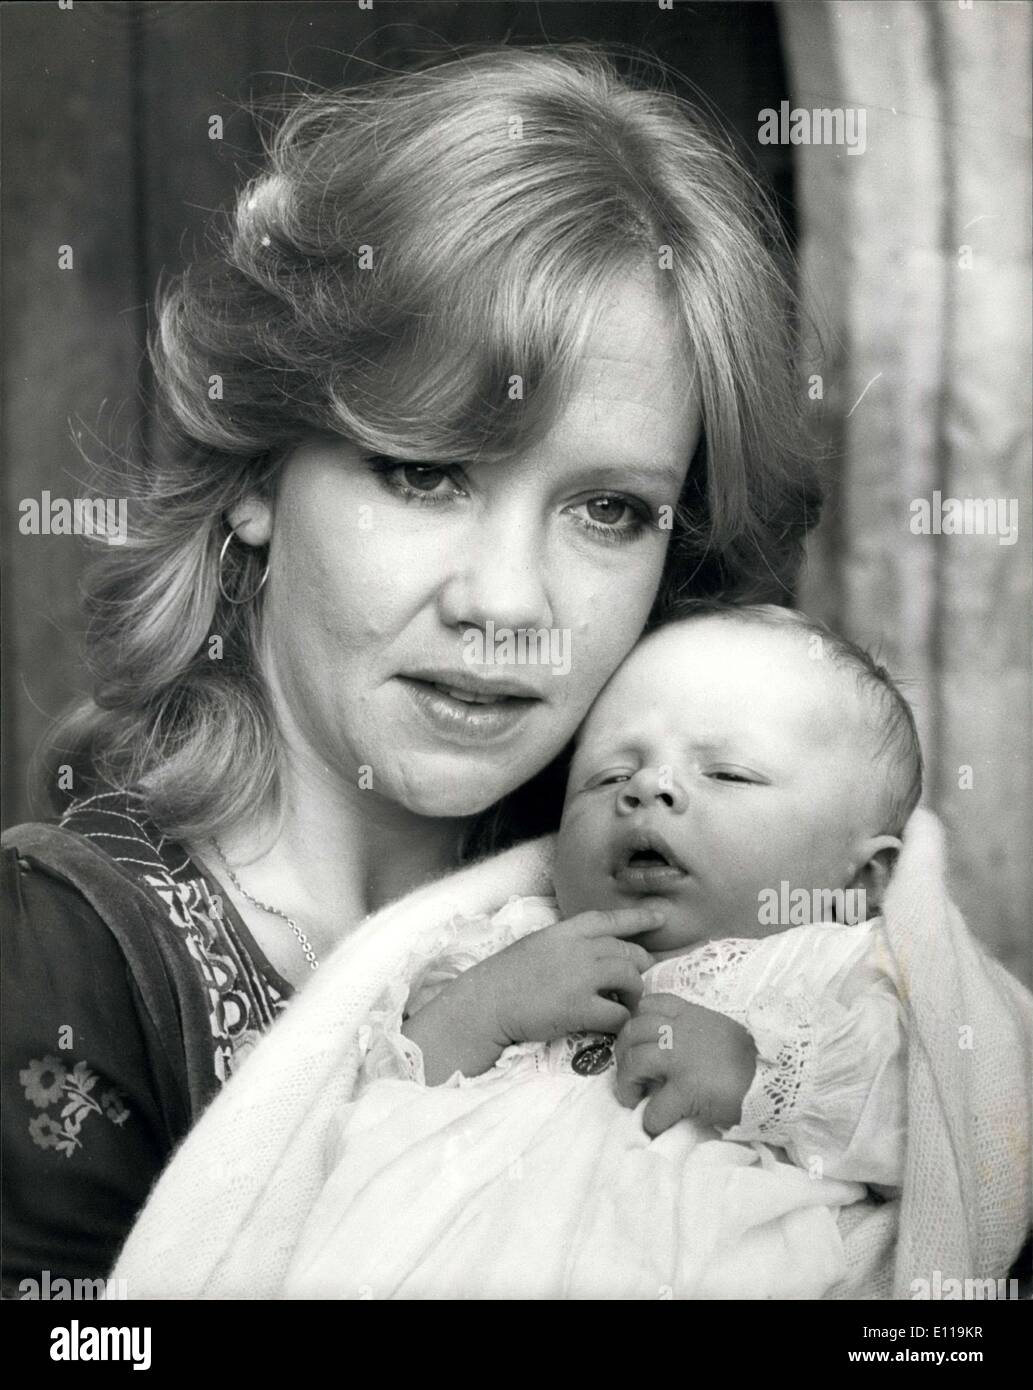 Sep. 11, 1976 - Hayley Mill's Month Old Love Baby Jason Is Christened: Actress Hayley Mill's month old Love Baby Jason, was christened this morning at the Parish Church, Denham, Bucks. where she was herself christened 30 years ago. Hayley Mills is married to film producer Roy Boulting, but they are parted. Jason's father is actor Leigh Lawson, they have no plans to marry. Photo shows: Hayley Mills with her baby son Jason after the christening today at the Parish Church Denham. Stock Photo